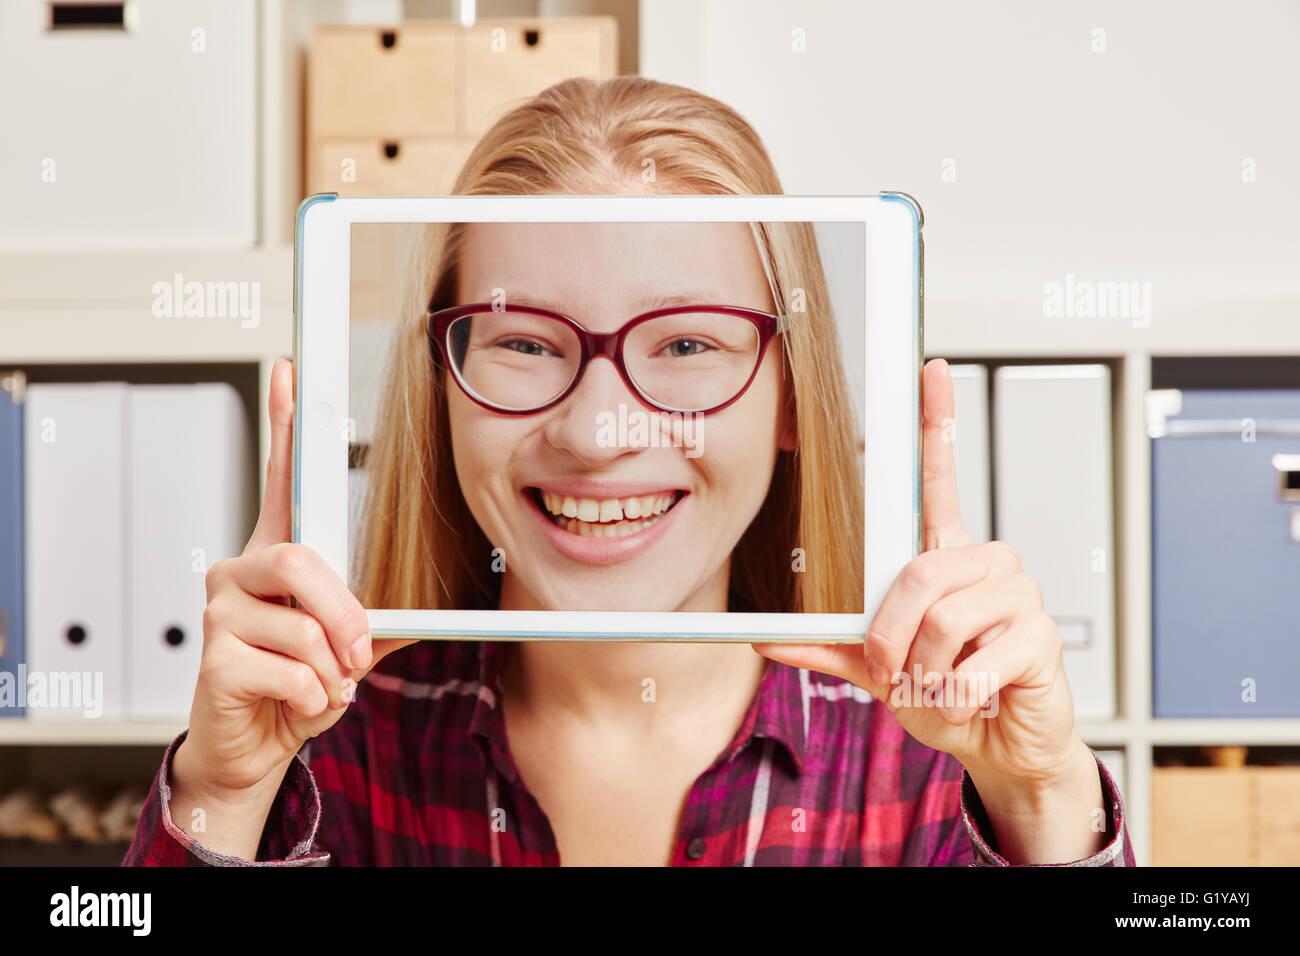 A woman holds a tablet in front of her with a smiling face in it Stock Photo